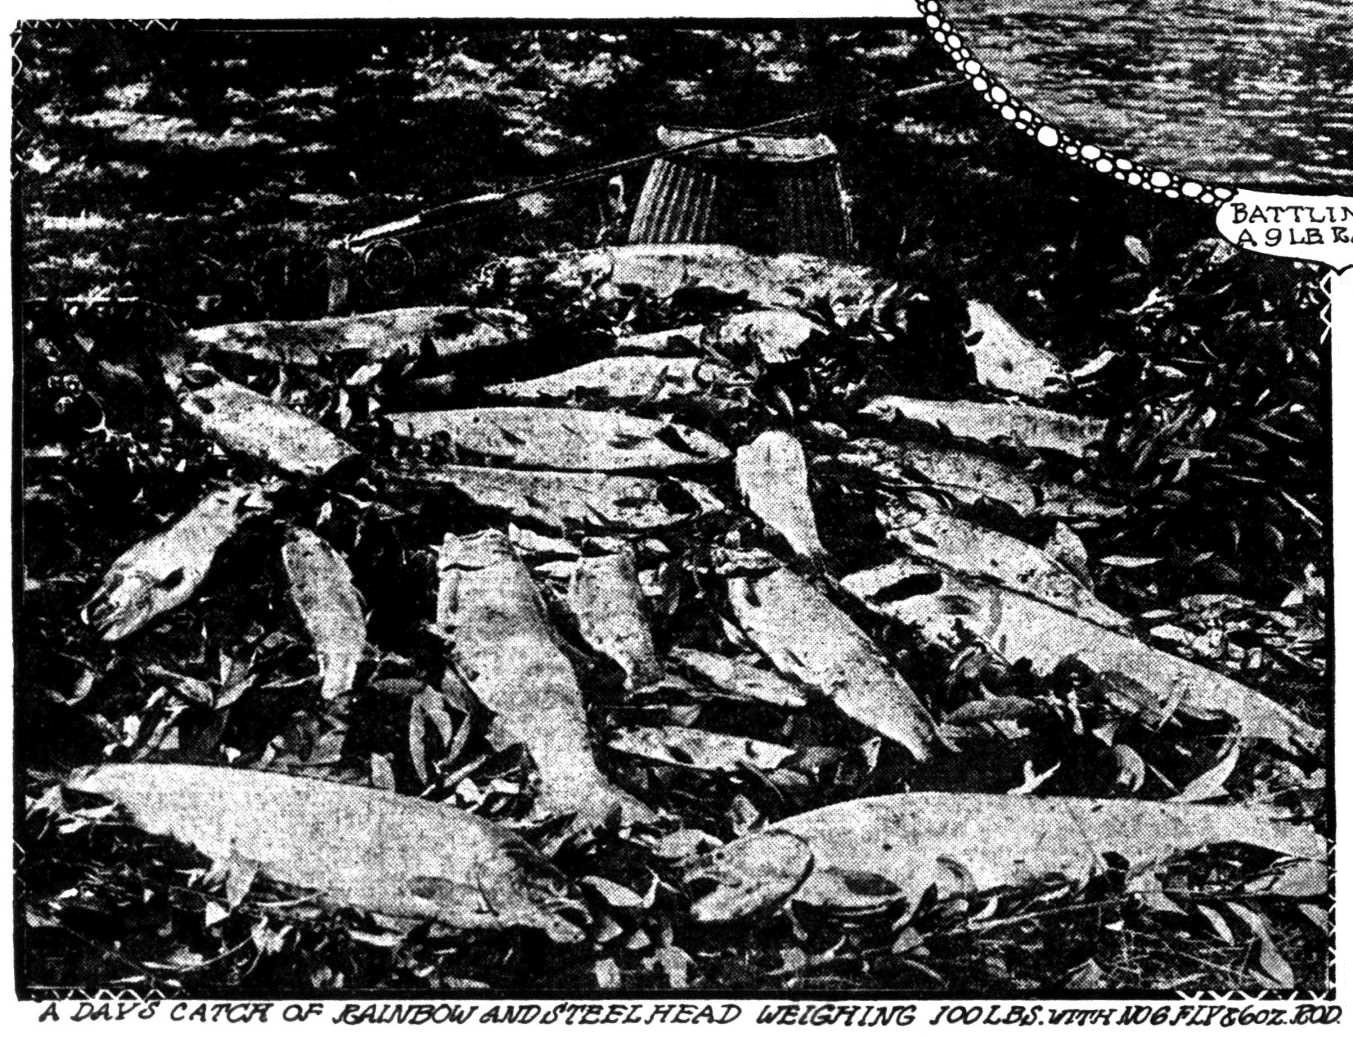 A Day's Catch, August 8, 1907 Oregon Daily Journal